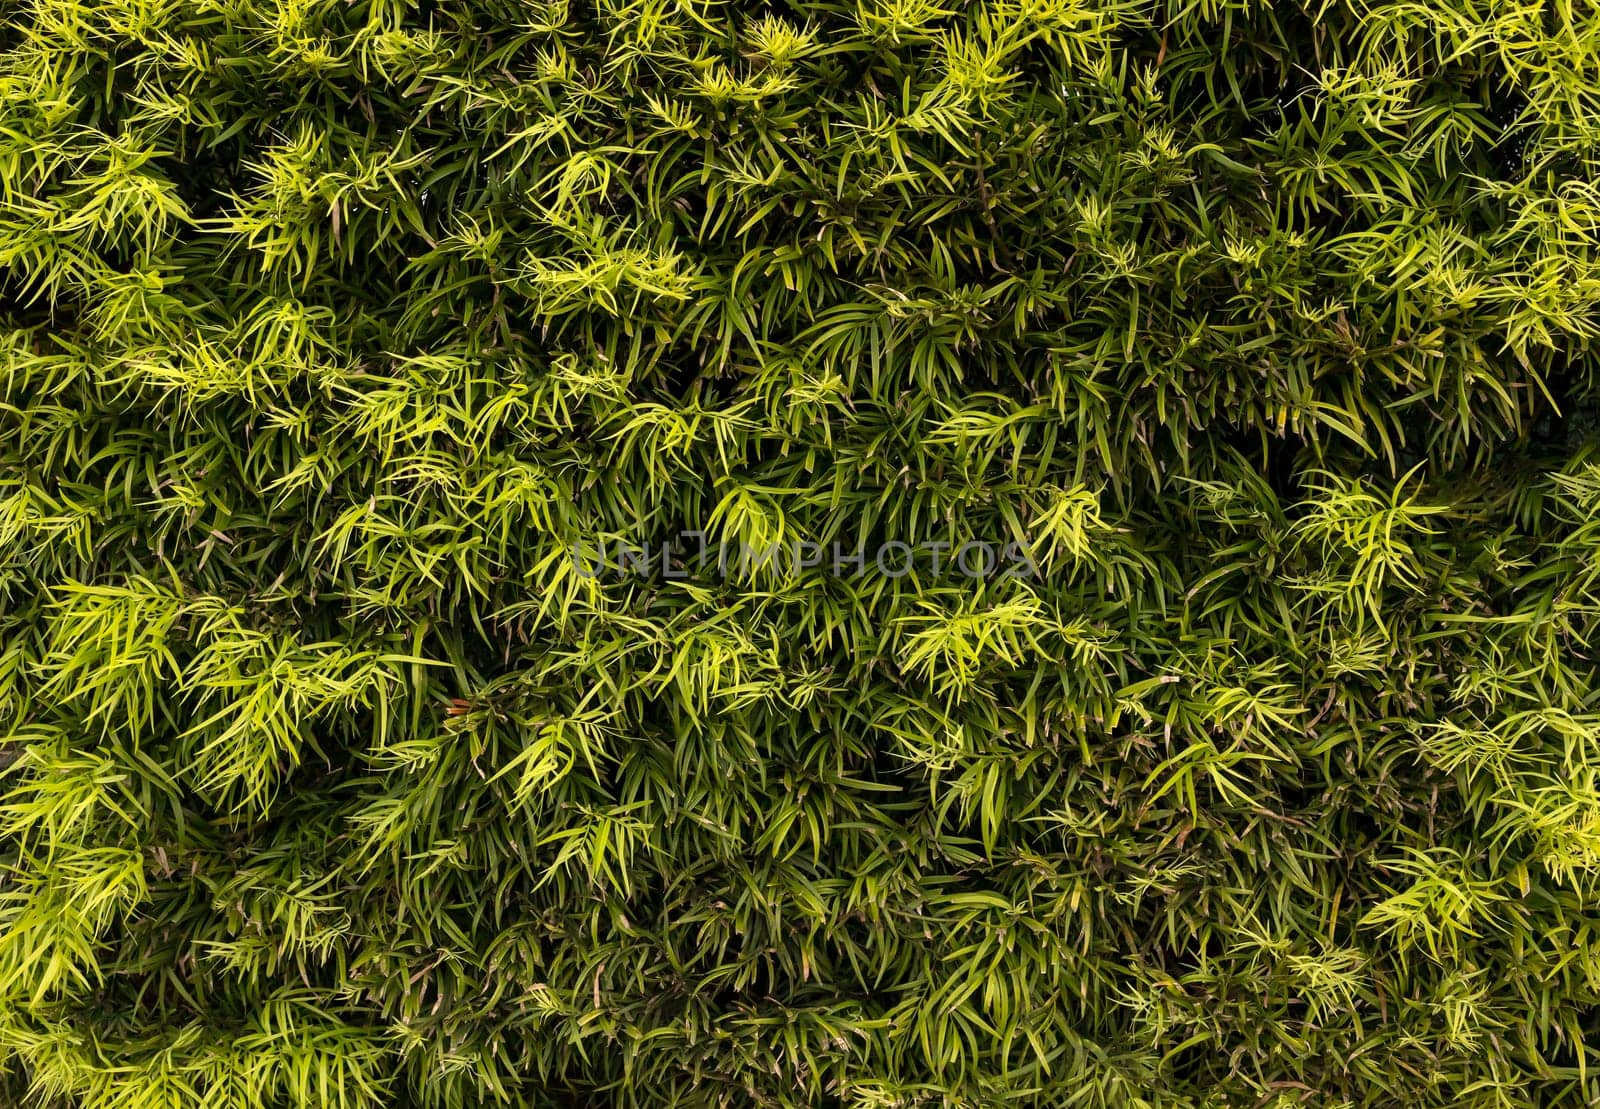 Bright Bamboo Green Leaves Background, Texture. Fresh Summer Natural Wallpaper. Horizontal Plane. Decorative Wall. High Quality Photo